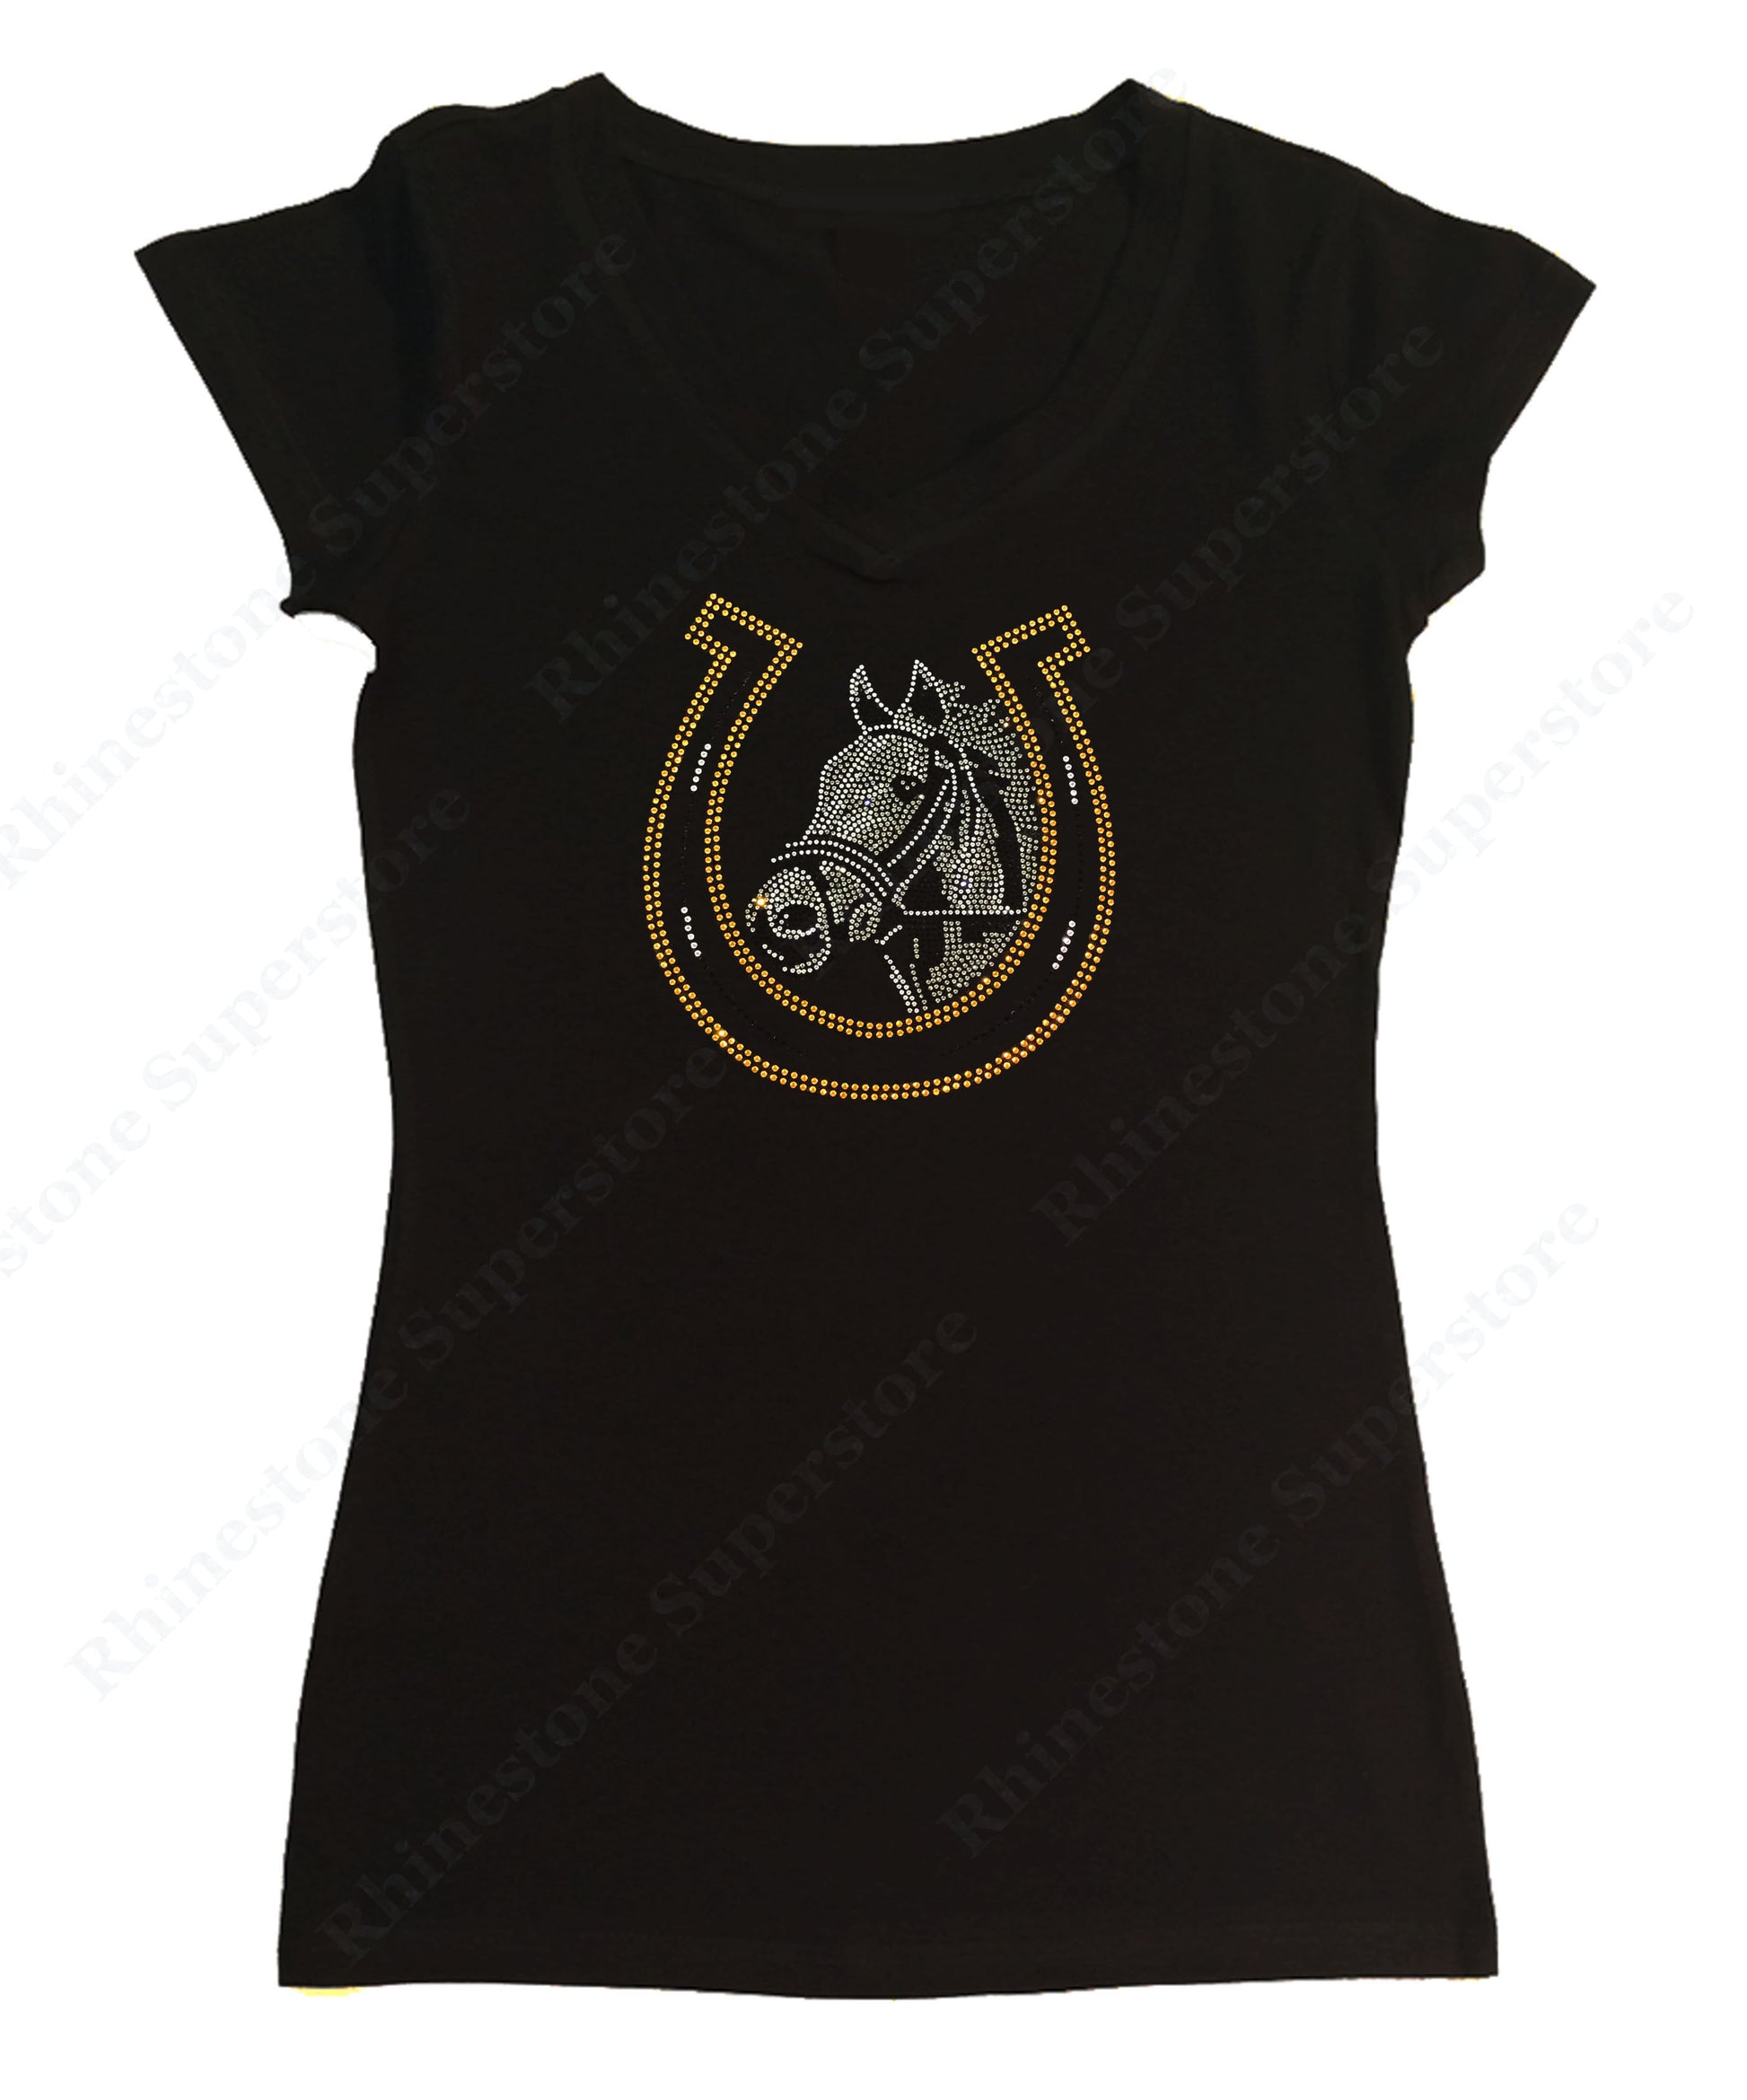 Womens T-shirt with Horse and  Lucky Horseshoe - Equestrian  in Rhinestones